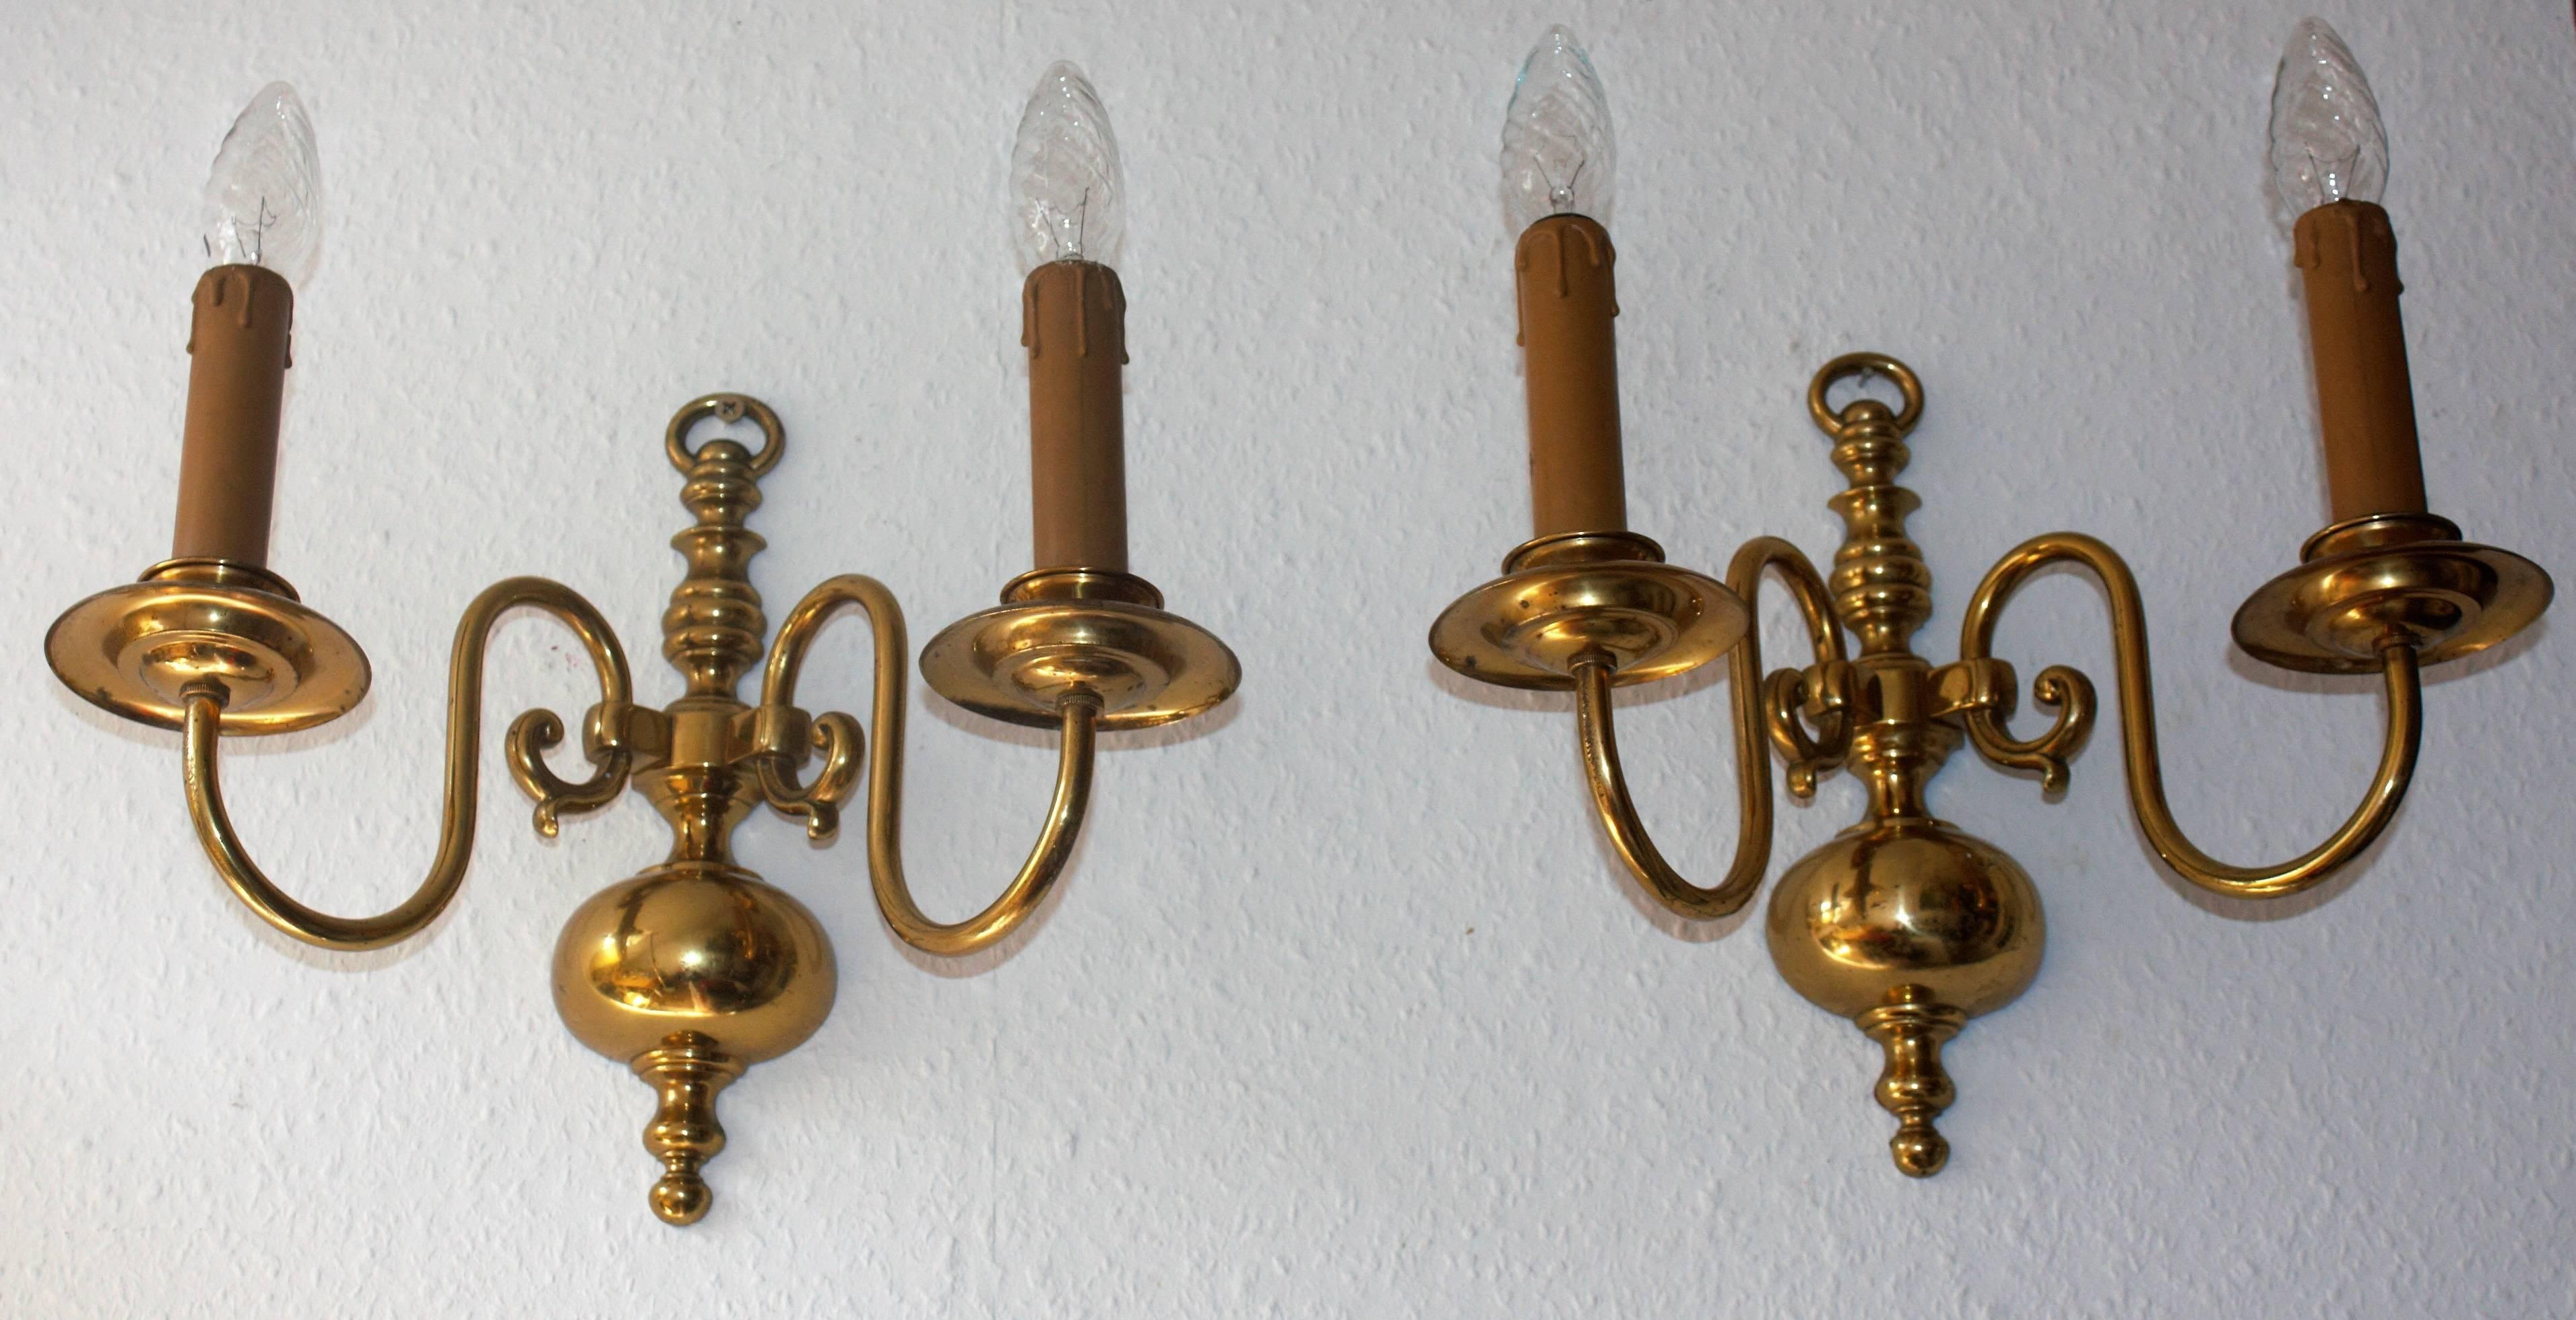 Elegant pair of wall lights in the style of Baroque, Germany, circa 1940s.
Each two Edison (e14) socket for standard screw bulbs.
Very good condition with old patination.